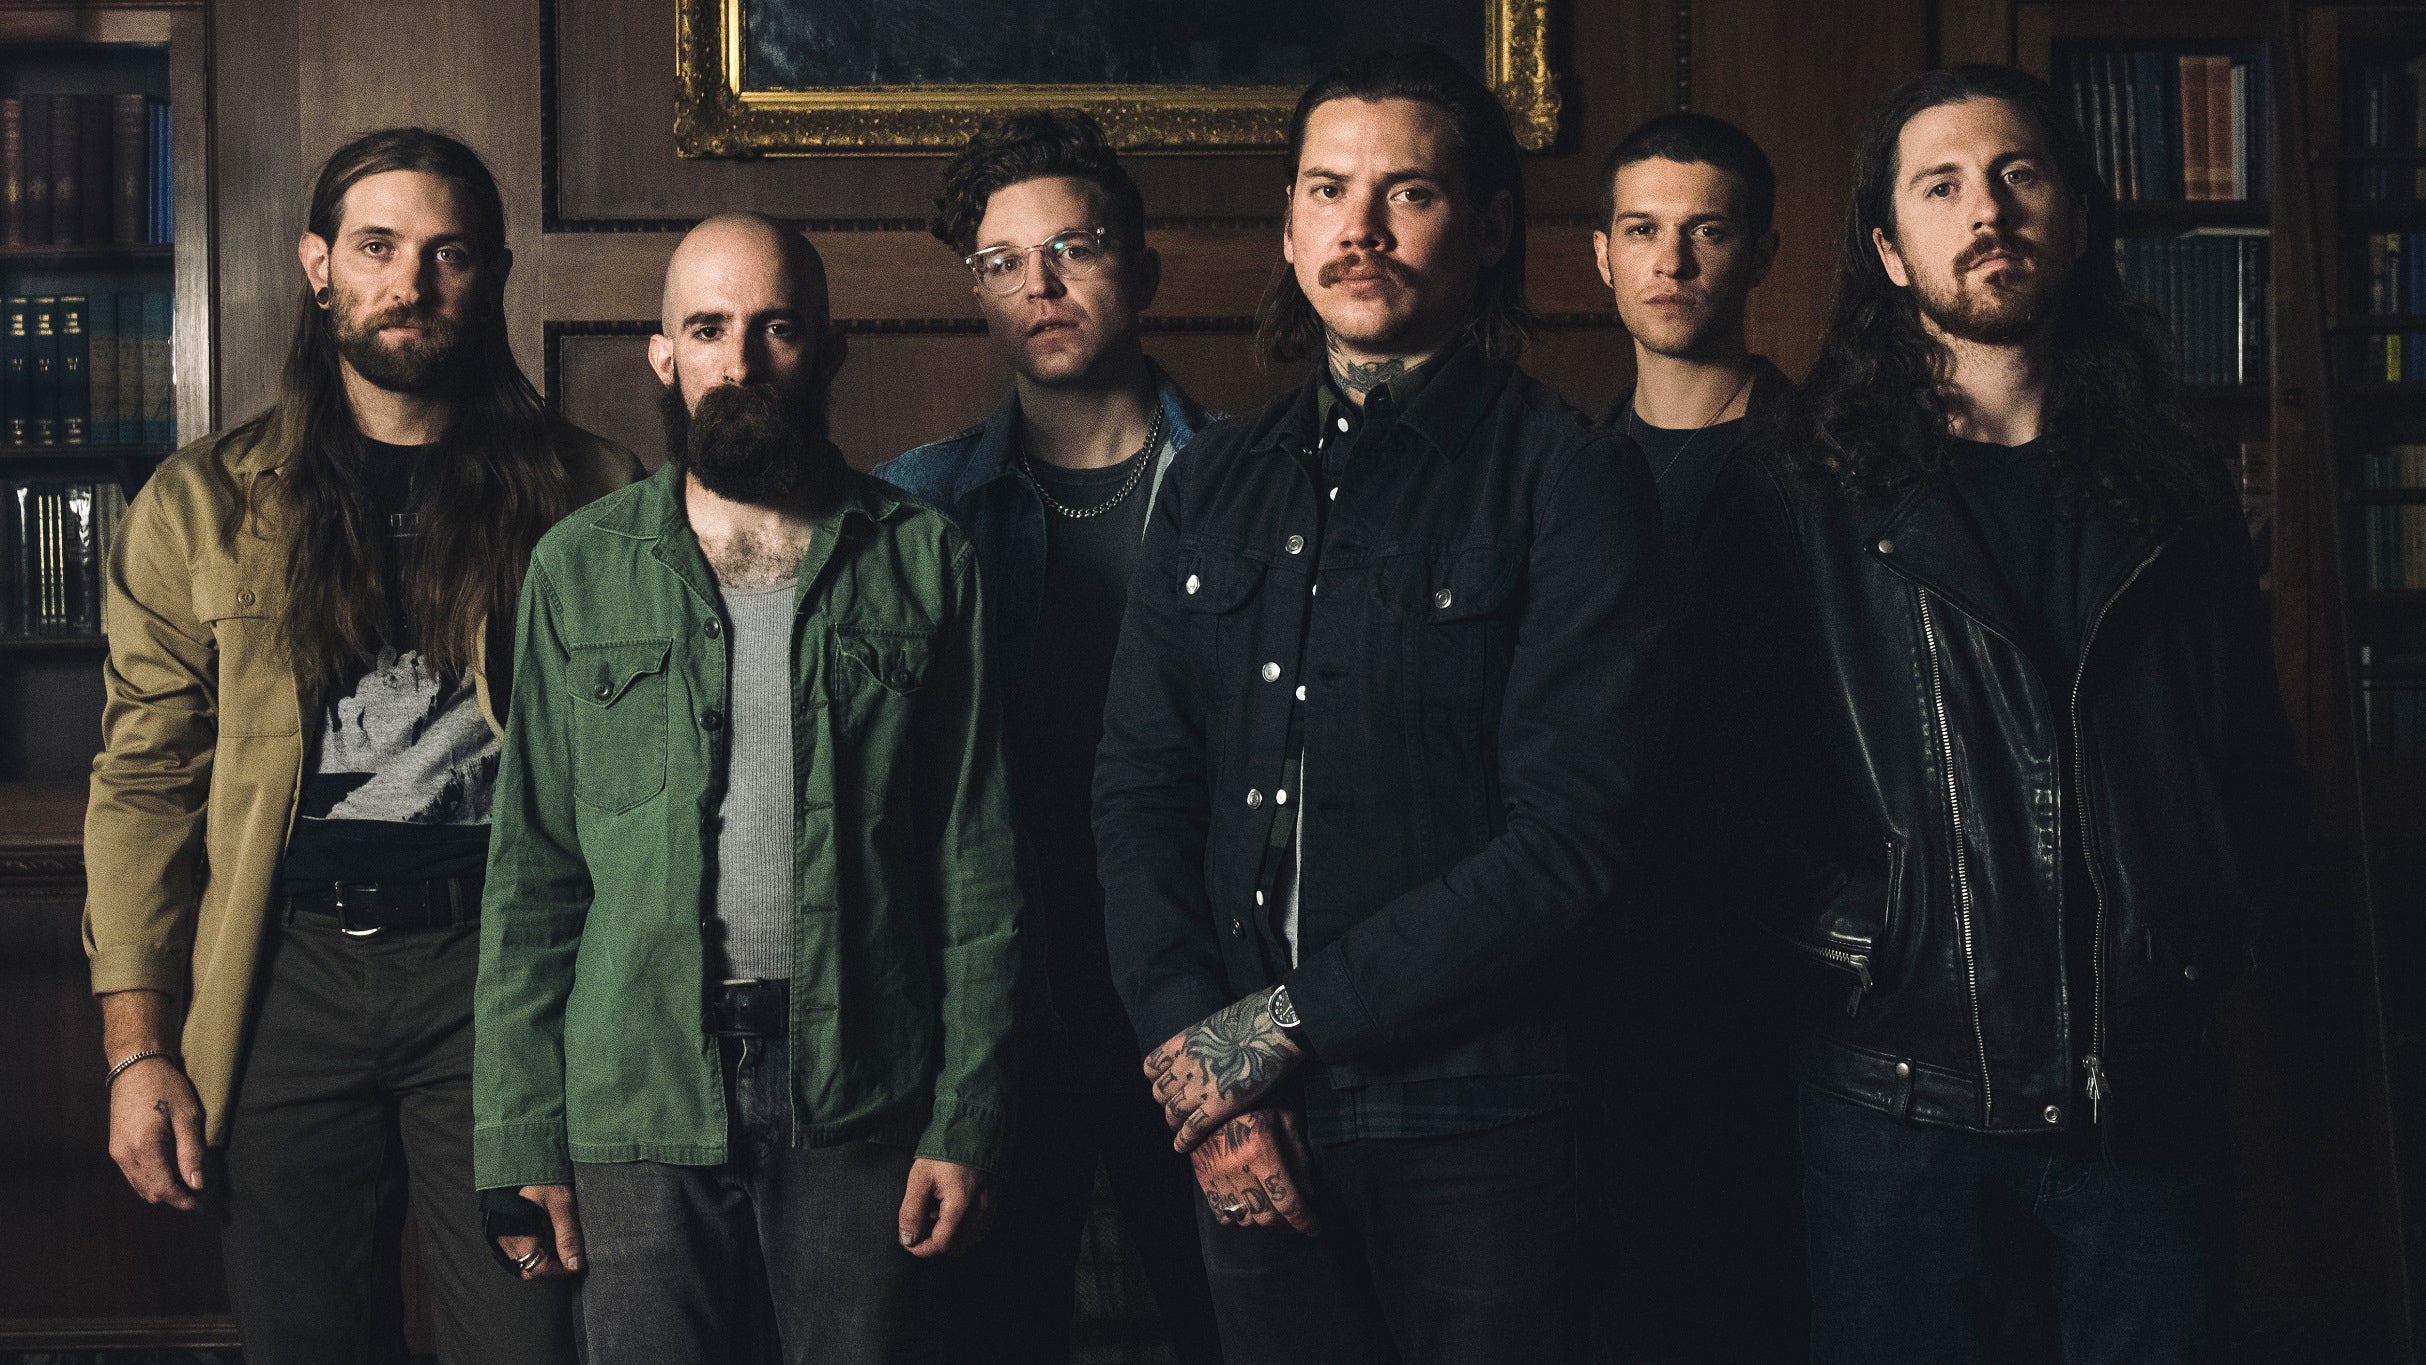 The Devil Wears Prada & Fit For A King: METALCORE DROPOUTS in Minneapolis promo photo for Affinity Plus presale offer code